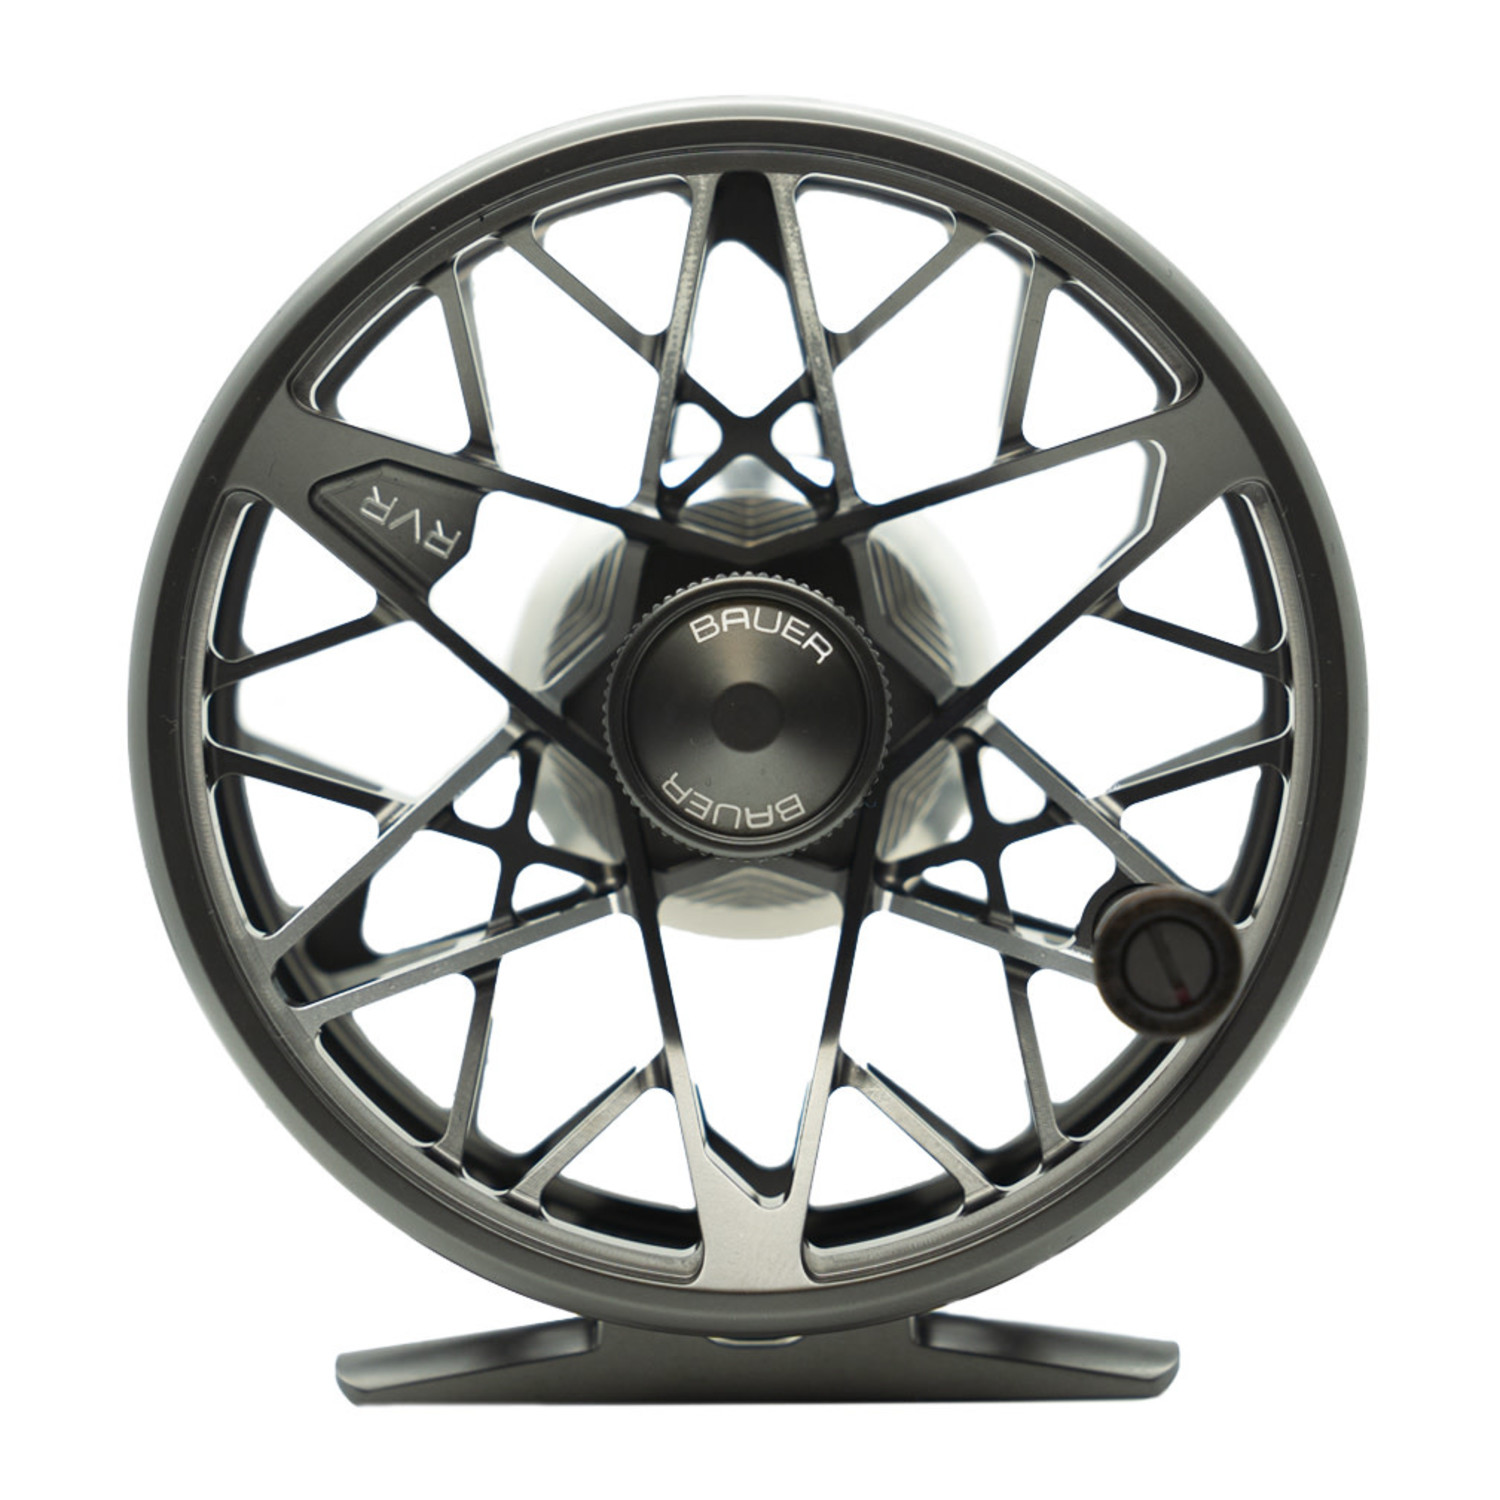 Mulinello RVR Fly Reel - Bauer - Like a River